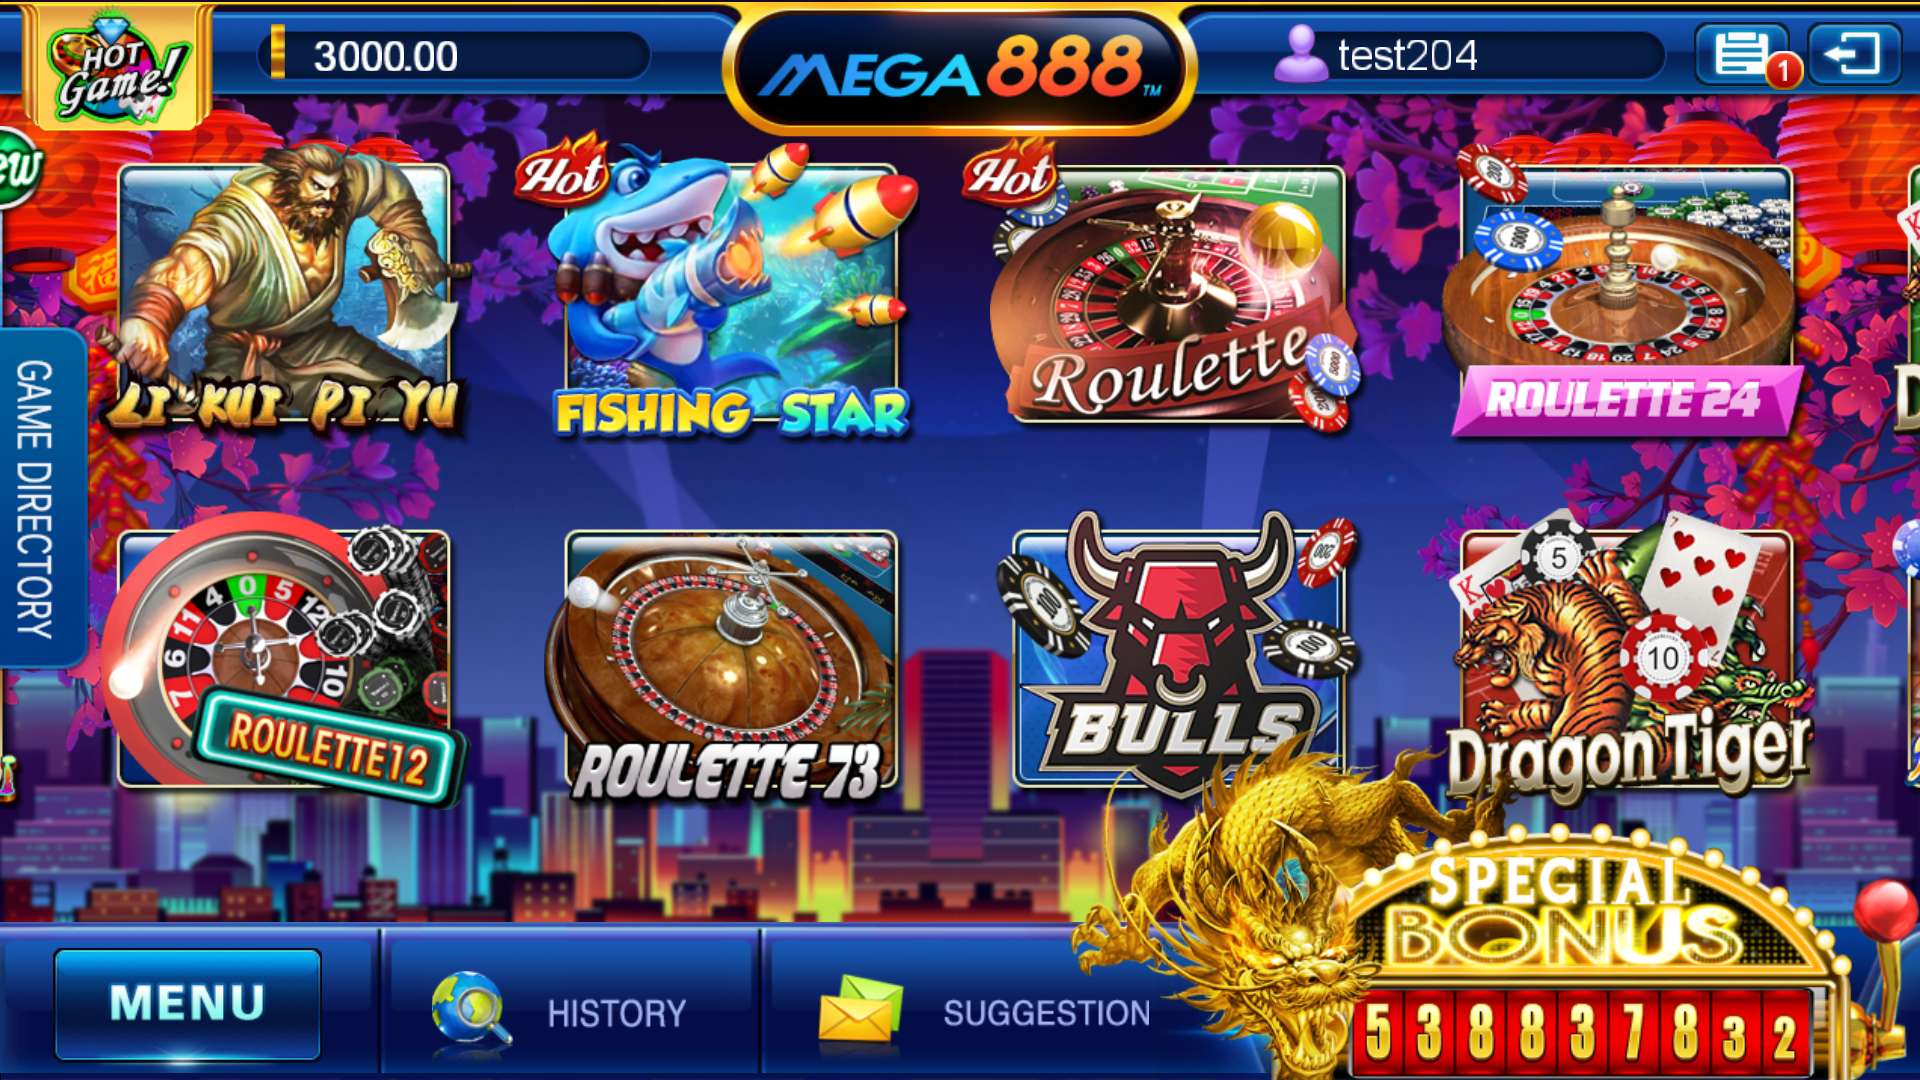 Common Mistakes Mega888 Slots Players Make In 2020